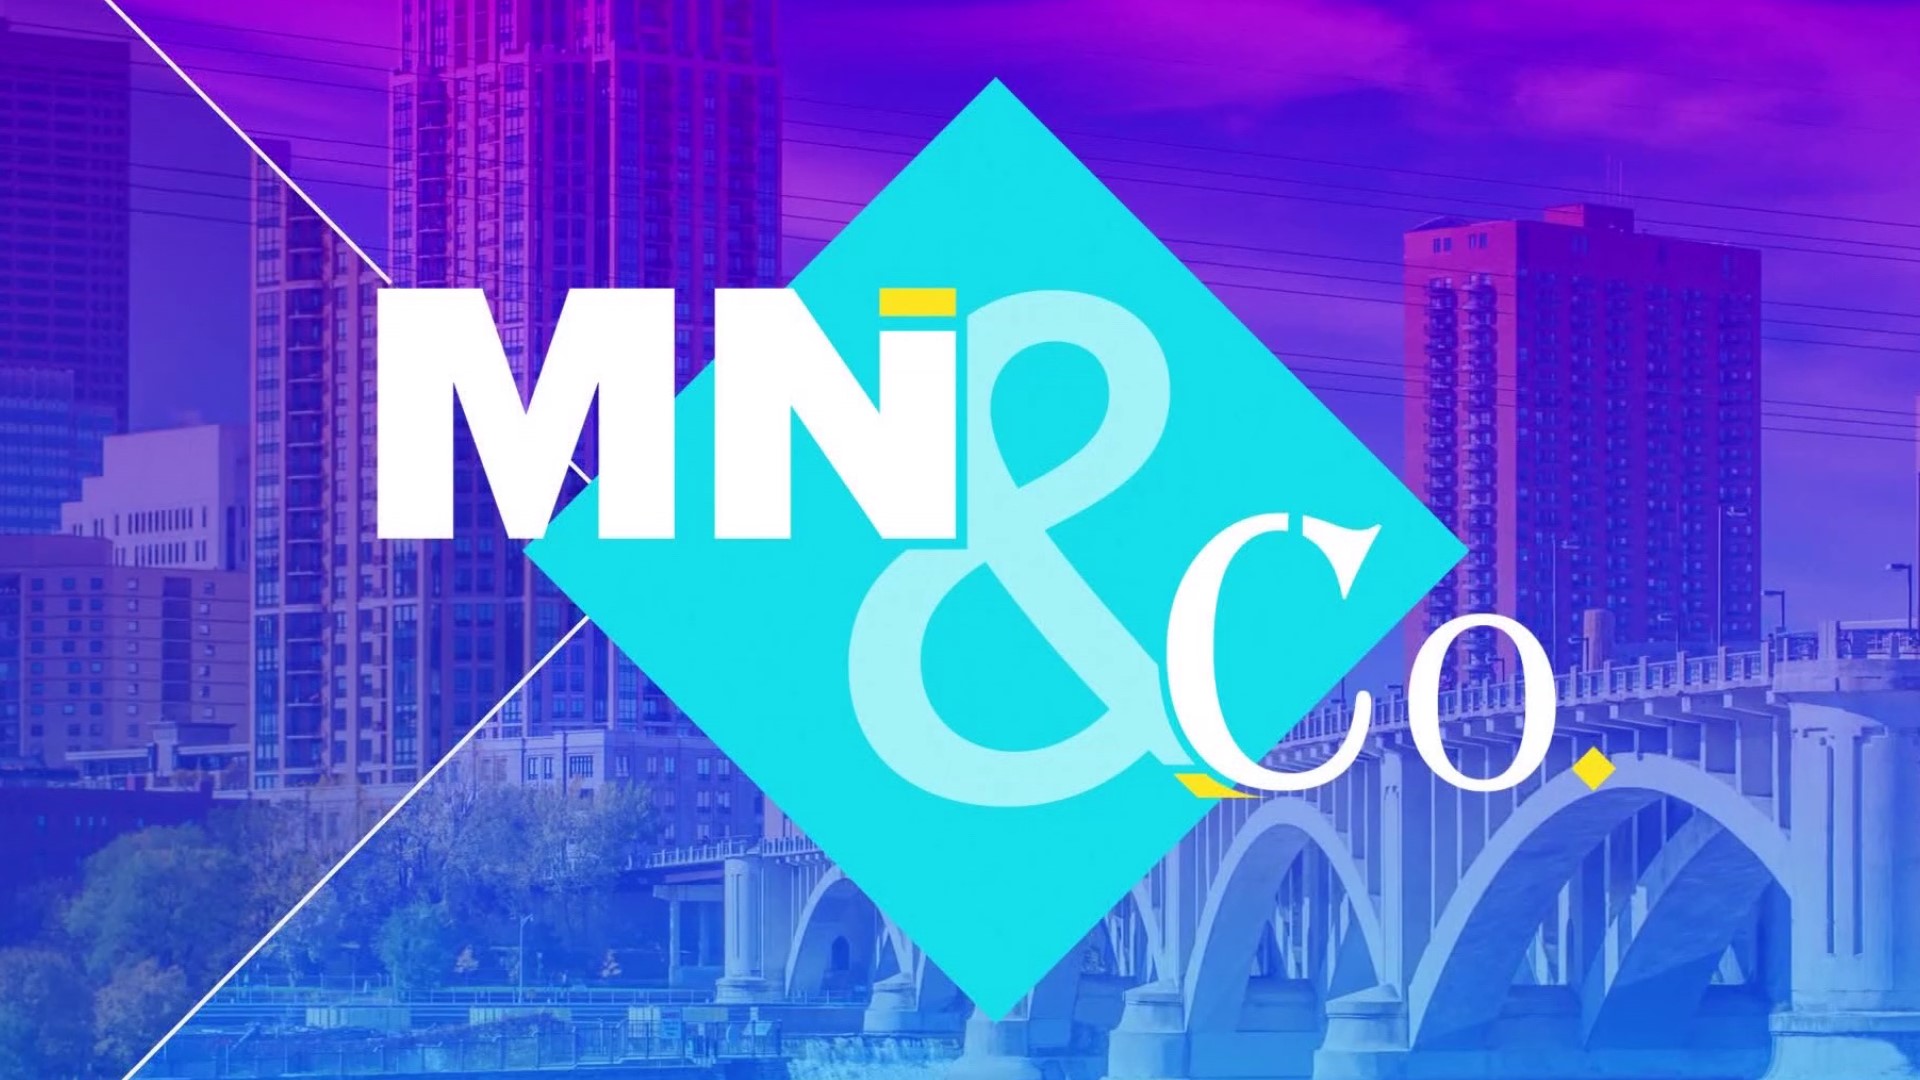 Minnesota & Company is a monthly talk show that spotlights local businesses and includes sponsored content.